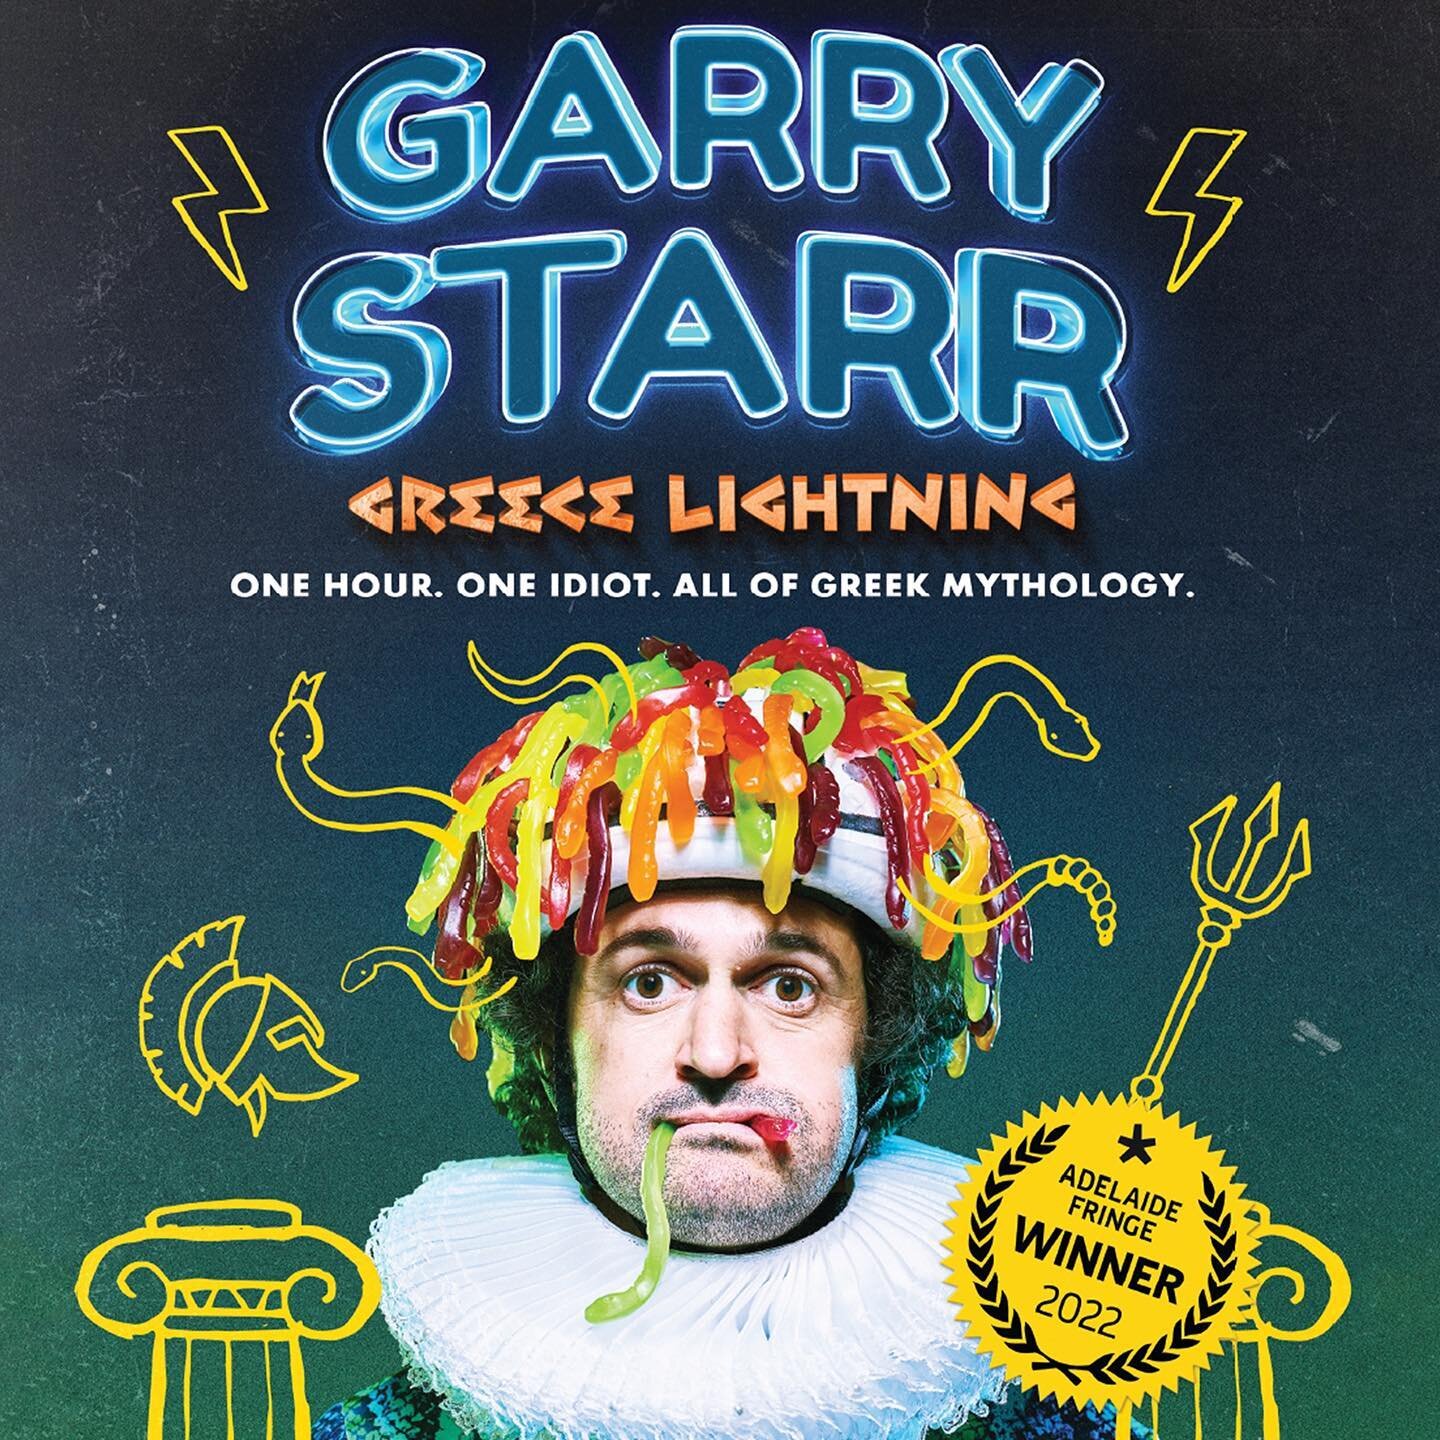 Melbourne, are you ready for the comedic event of the season? 🎉 Our client Garry Starr's smash-hit show, Greece Lightning 🧿⚡️ is playing @ComedyRepublicMelb, and it's everything you could want in a night of comedy - and more🍑⁠
⁠
With Garry's signa